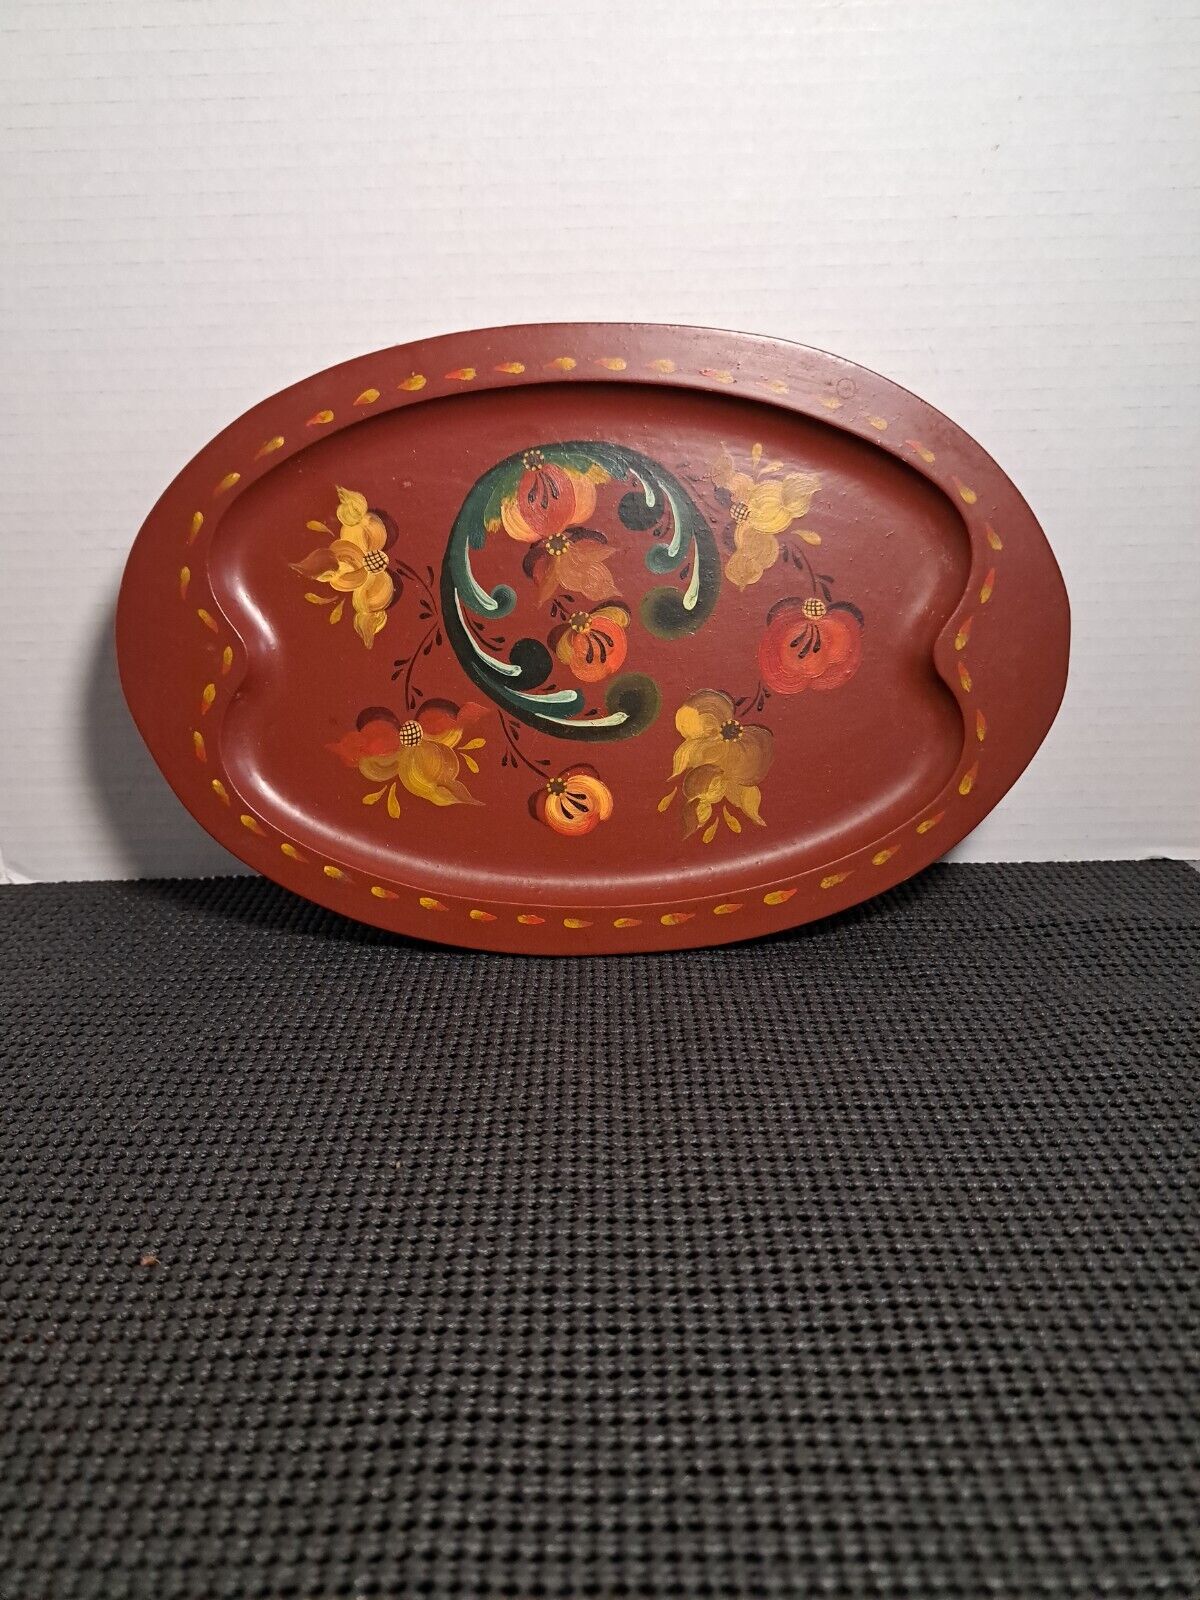 Vintage Footed Wooden Tray Trinket Rosemaling Signed Fall Colors